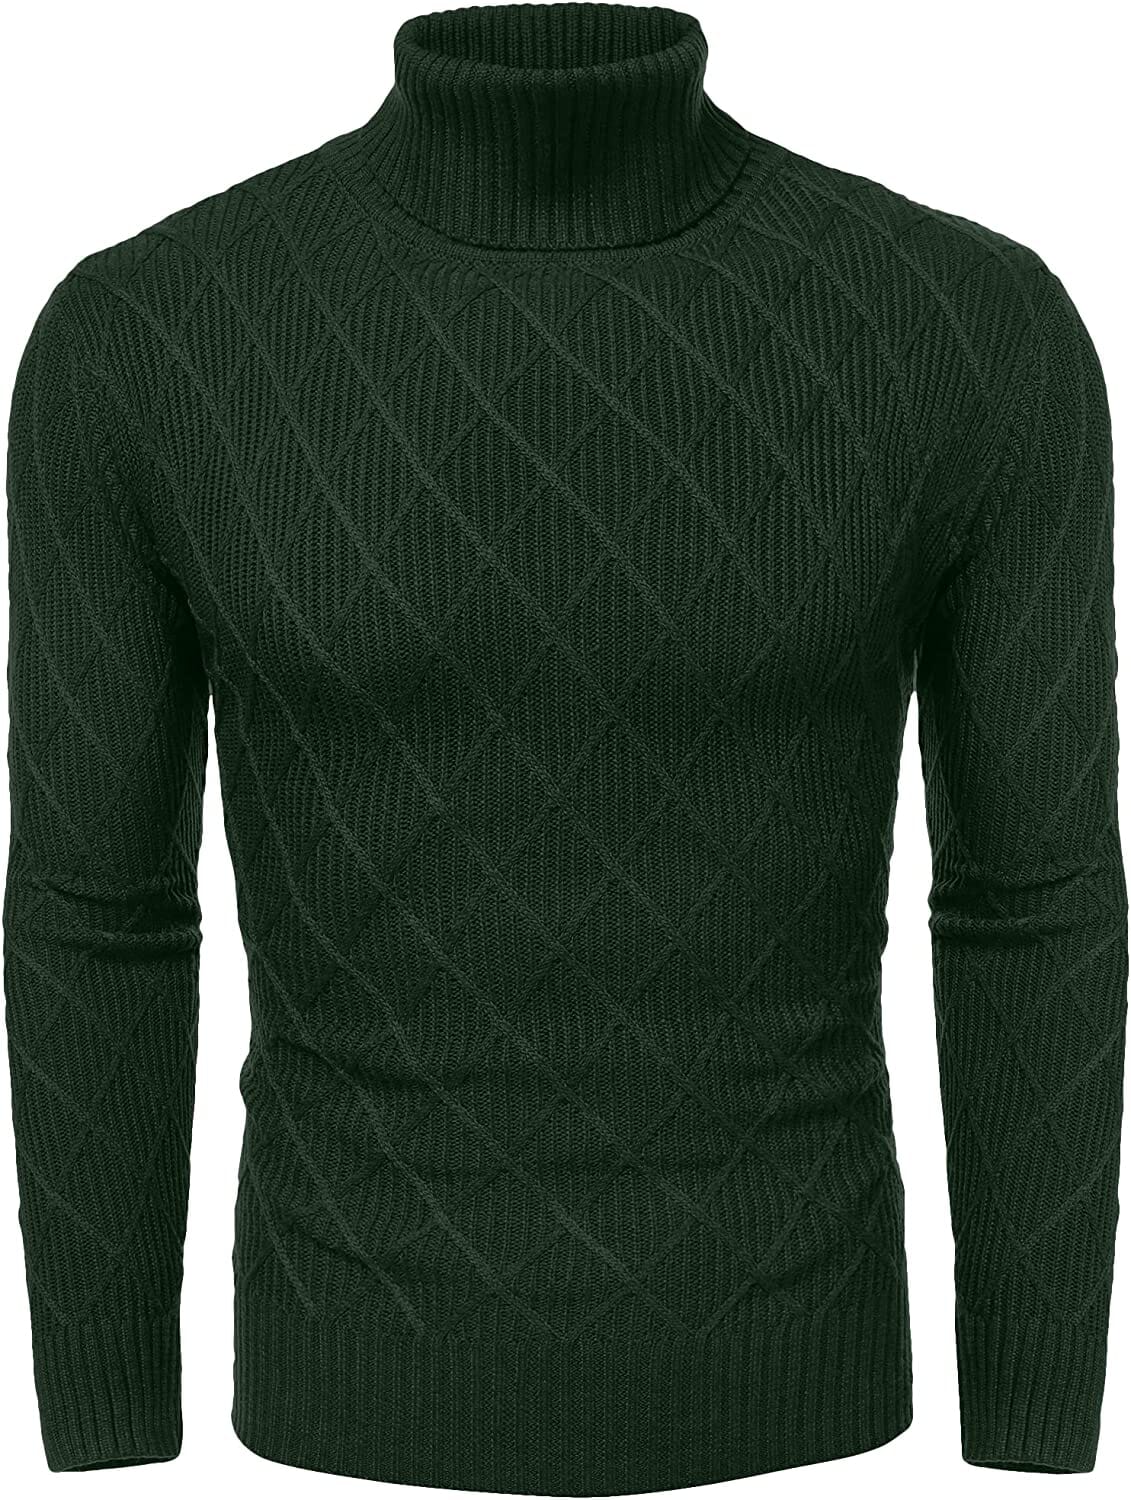 Slim Fit Thick Cotton Pullover Turtleneck Sweaters (US Only) Sweaters COOFANDY Store Green S 